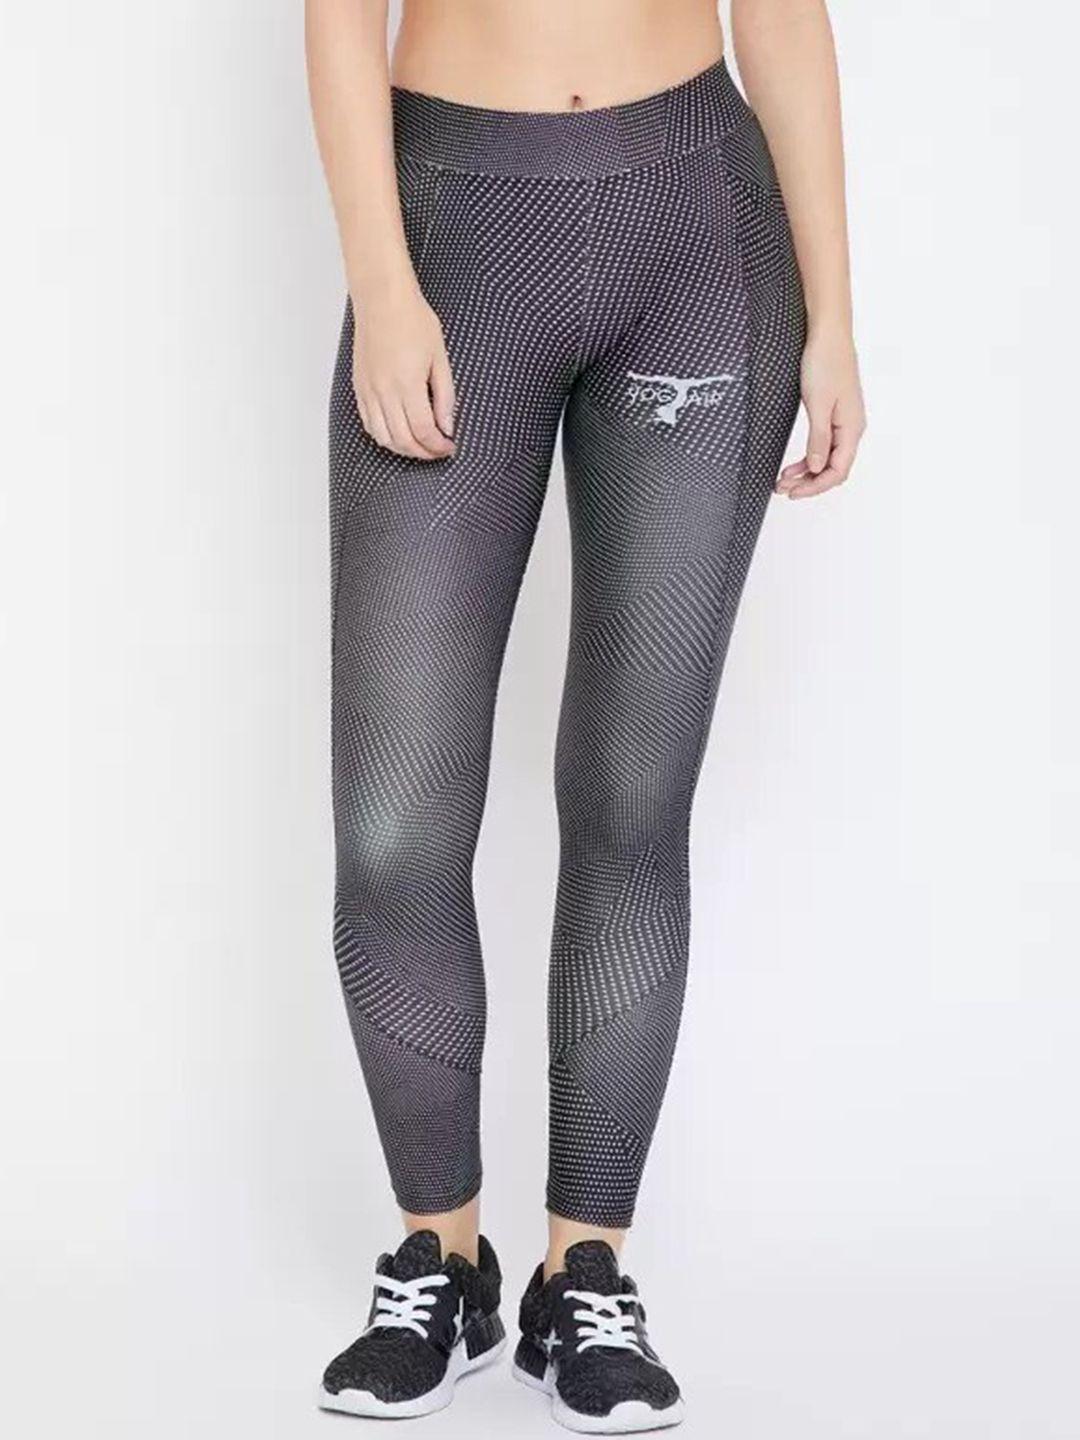 bitterlime women slim-fit ankle-length gym tights